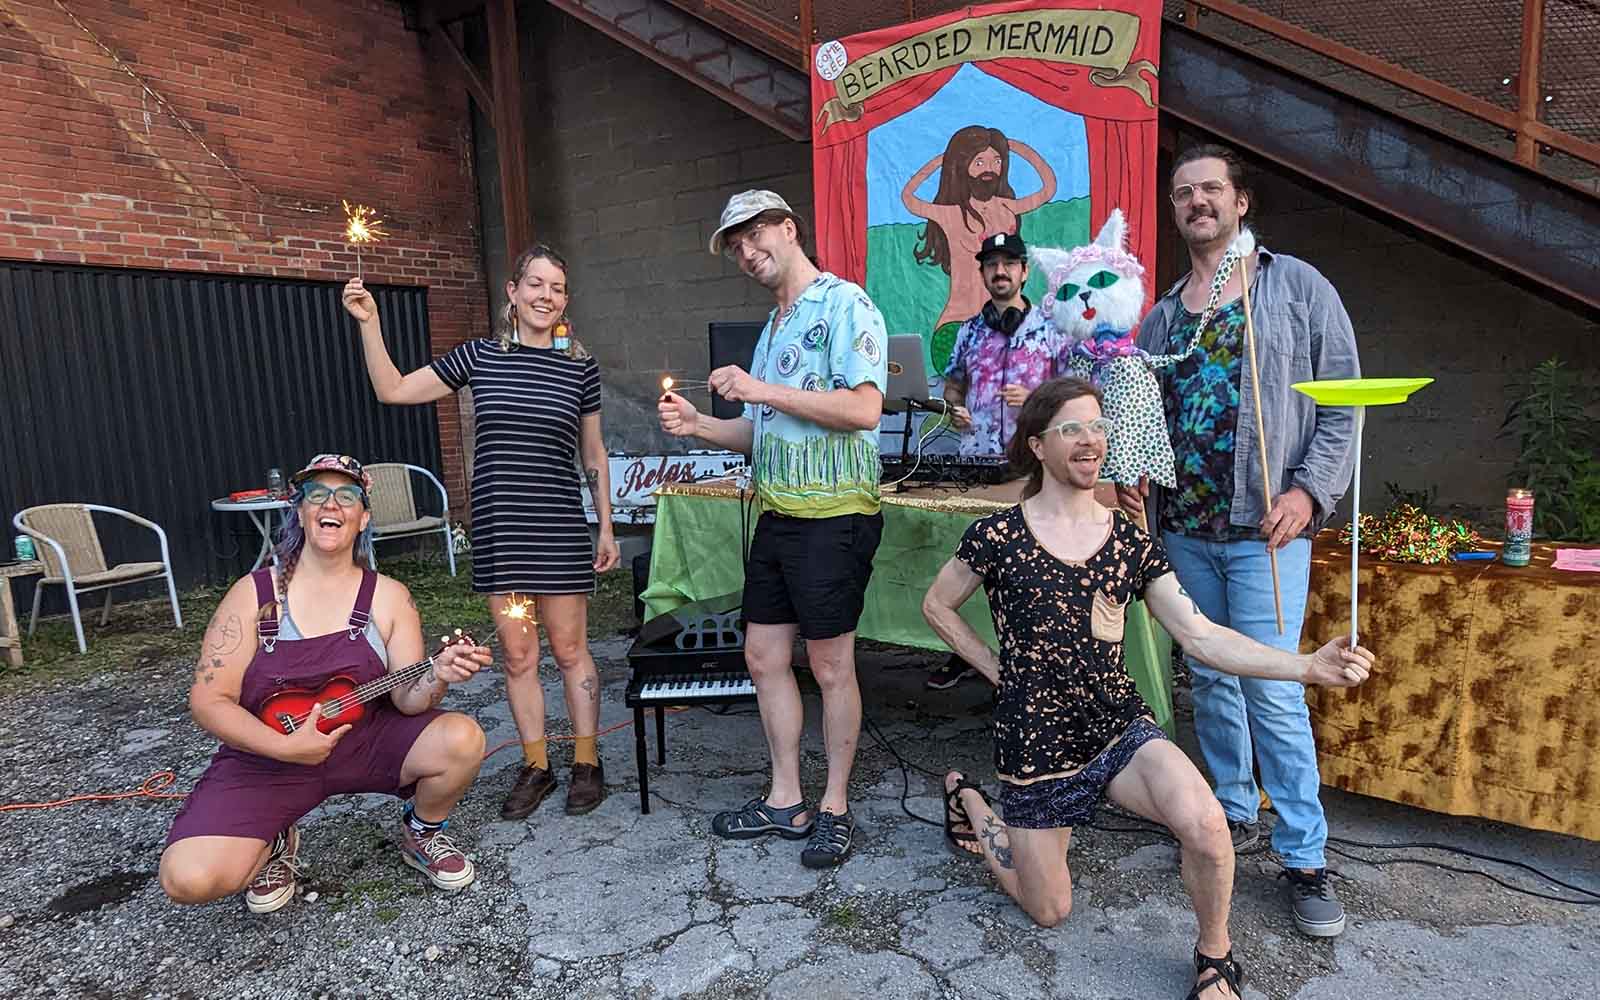 Six eclectic, young white people pose for an image. Some hold sparklers, another has a puppet, one is spinning a plate, and there is a DJ in front of a circus-style bearded mermaid banner.